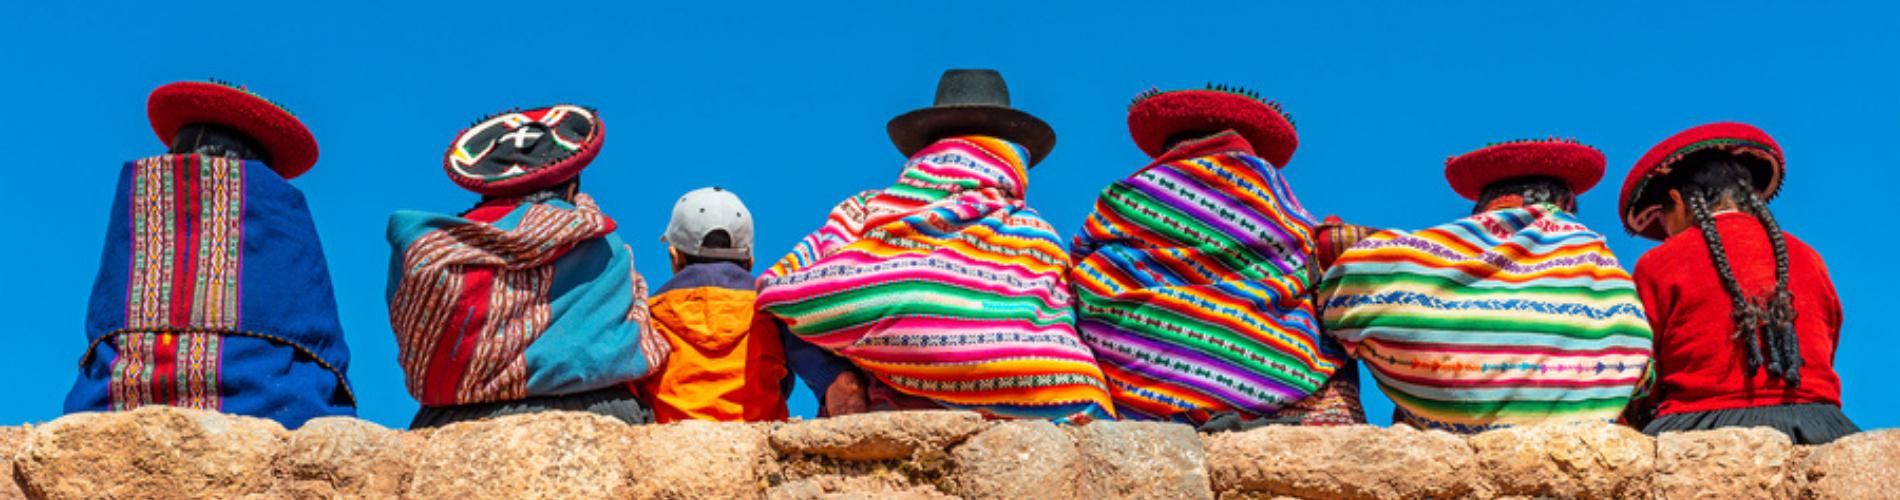 GIVING BACK- The incredible positives of volunteering when you travel in Peru